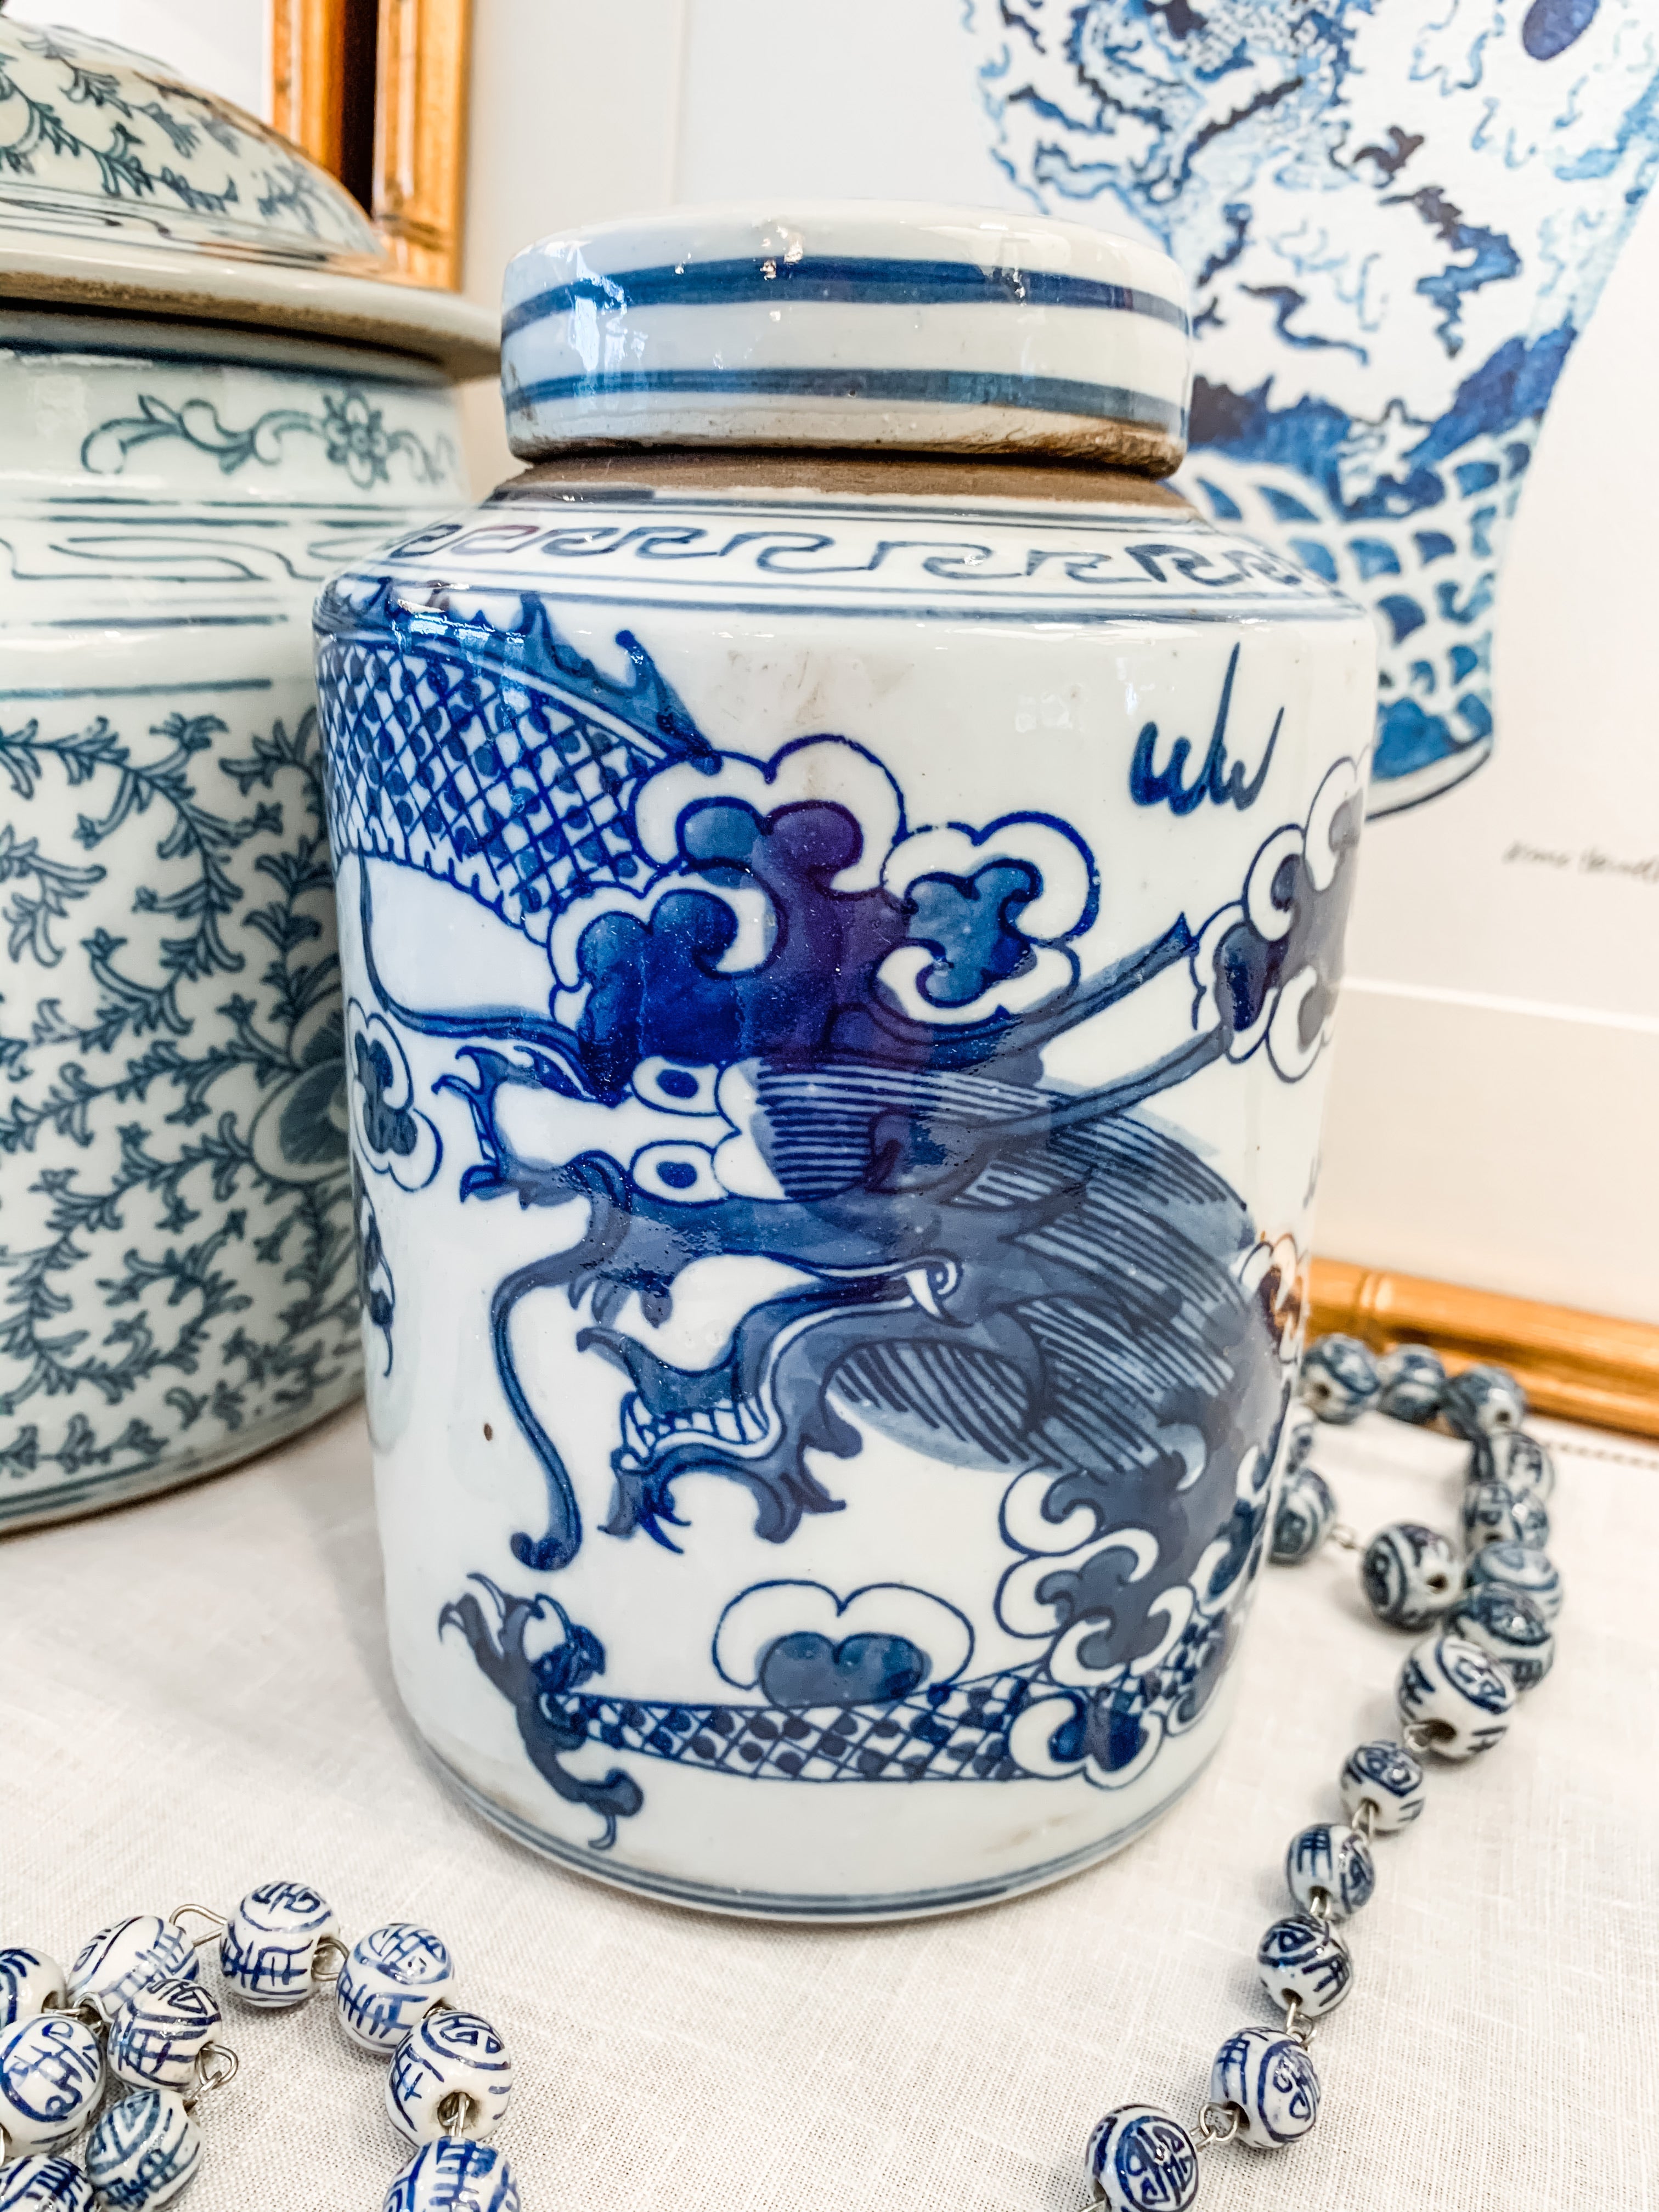 Shop Collectible Brooks for a wide selection of classic blue and white porcelain jars, perfect for adding a touch of chinoiserie to your home decor!  This beautiful hand painted jar is made in the antique style and features a dragon design.  It stands 7.5" tall.  